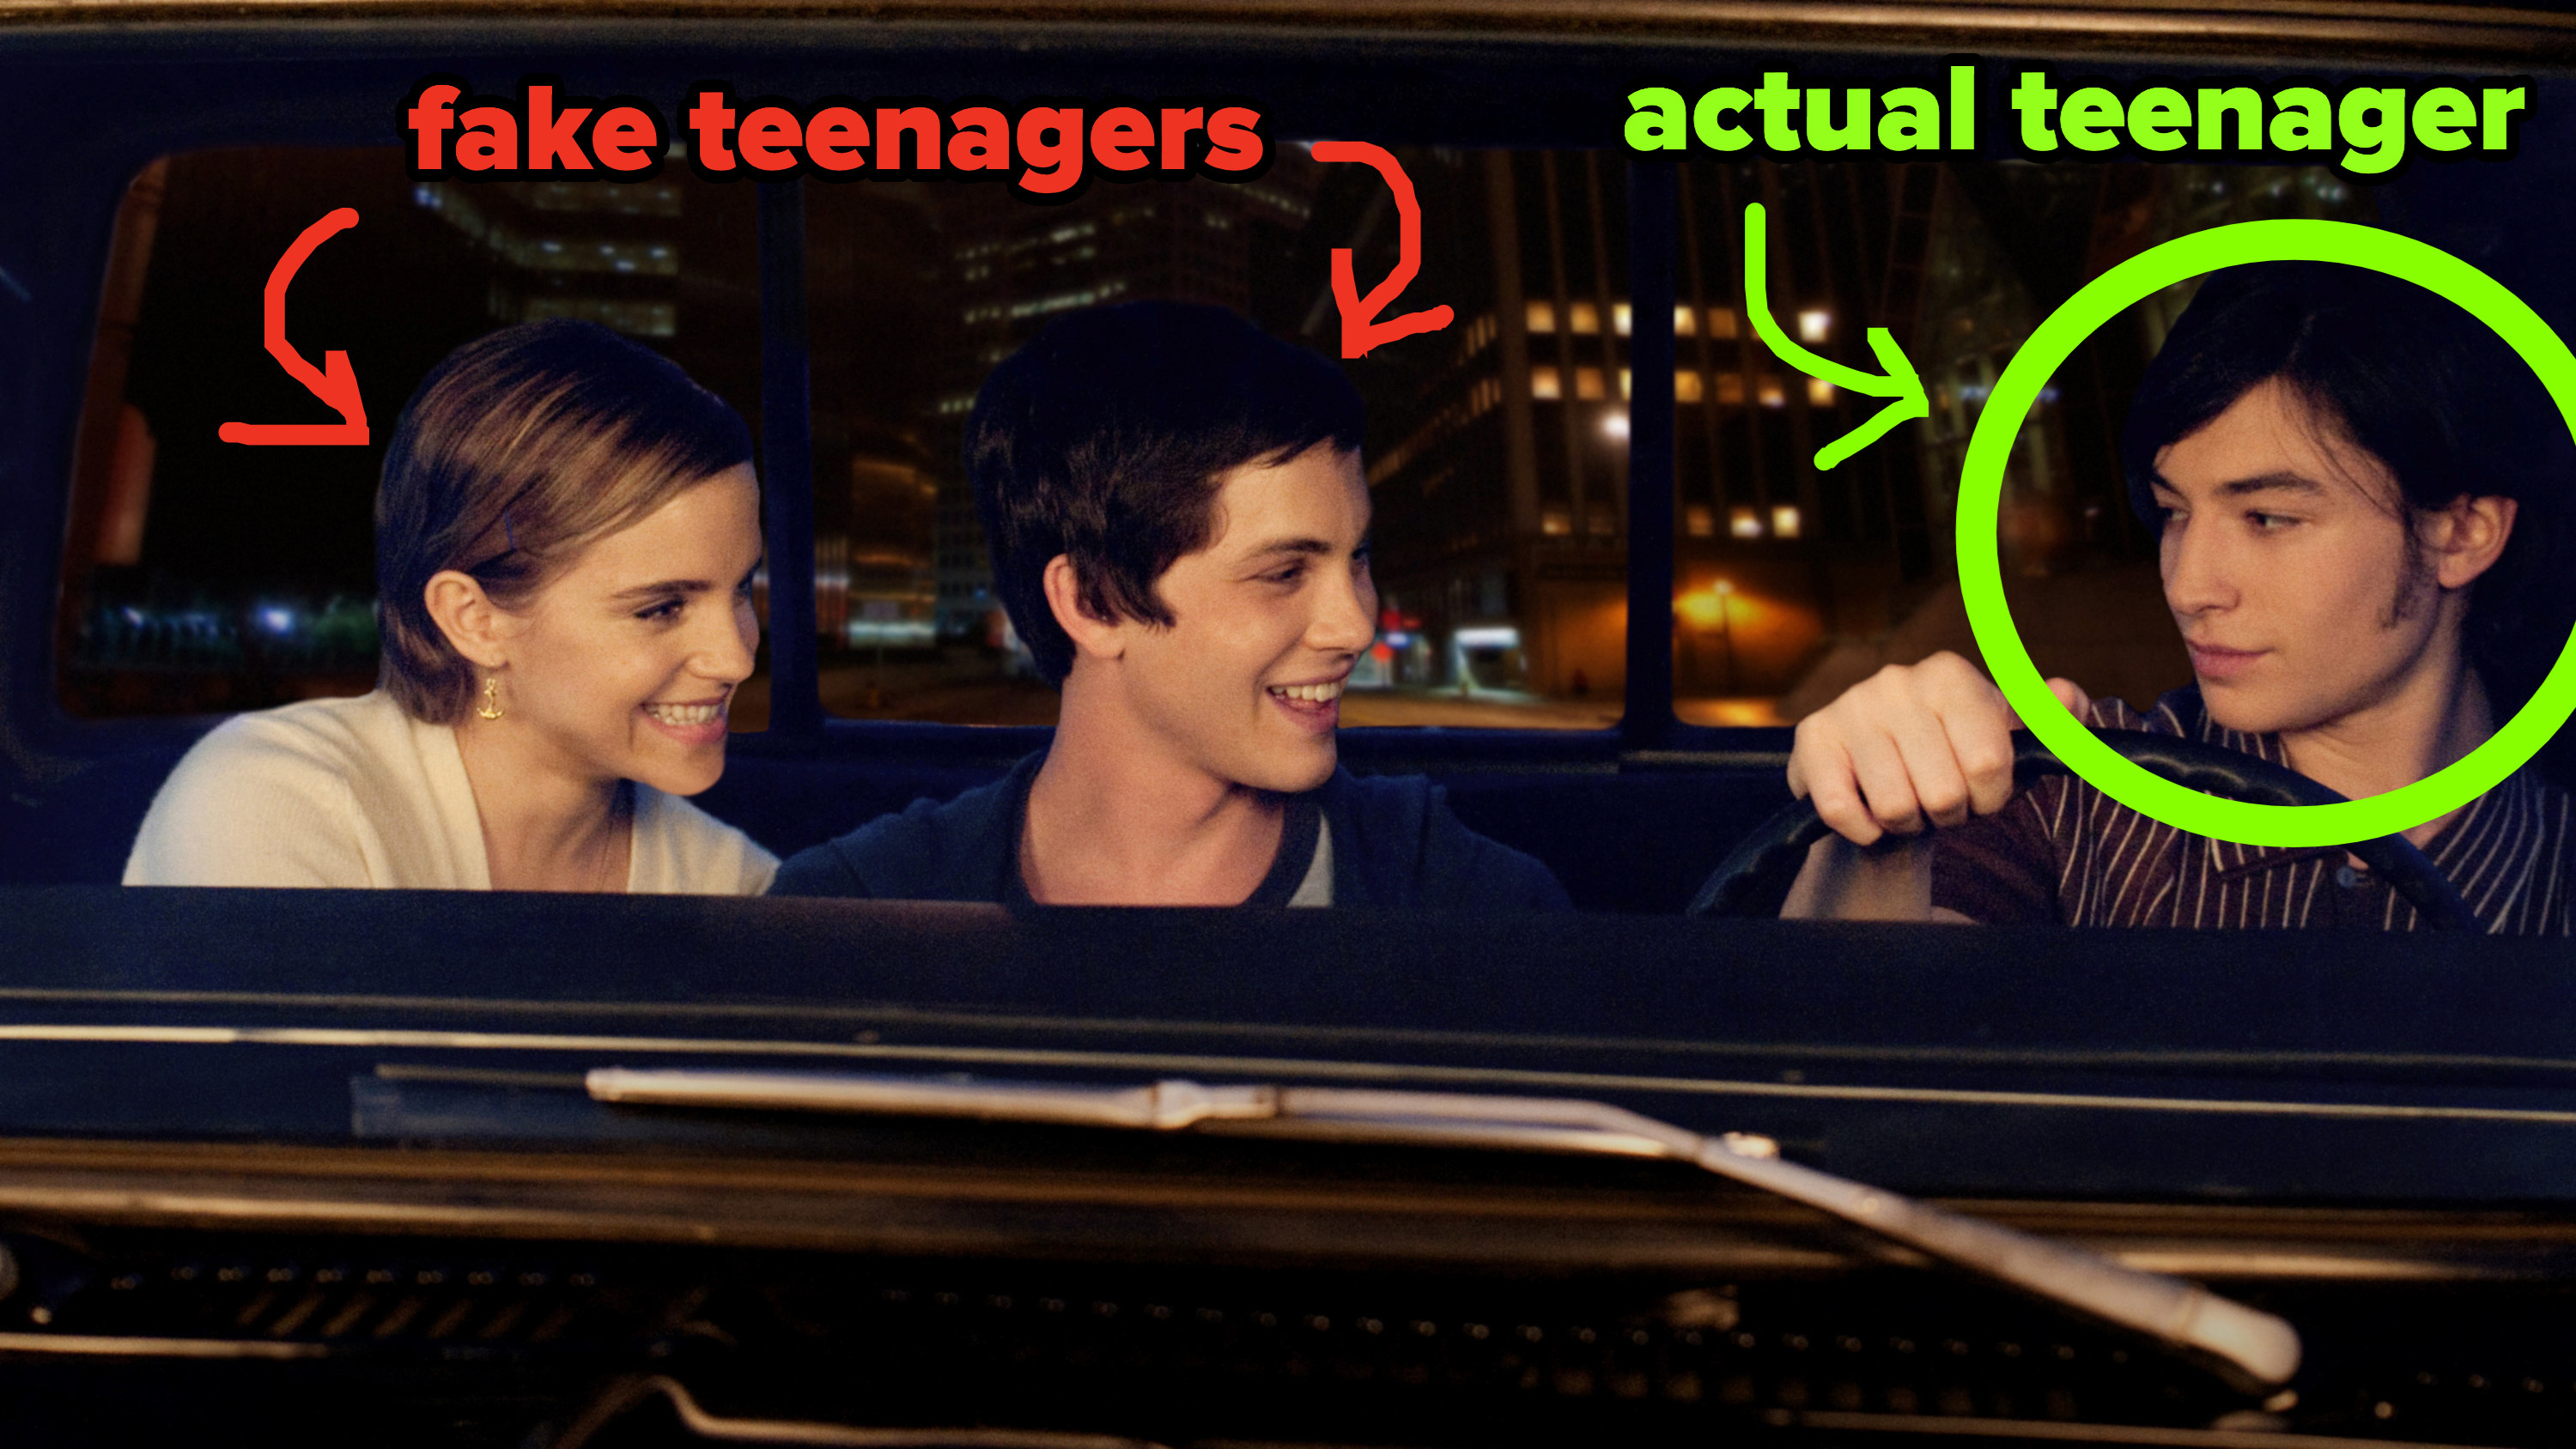 Emma Watson and Logan Lerman labeled &quot;fake teenagers&quot; and Ezra Miller labeled &quot;actual teenager&quot;